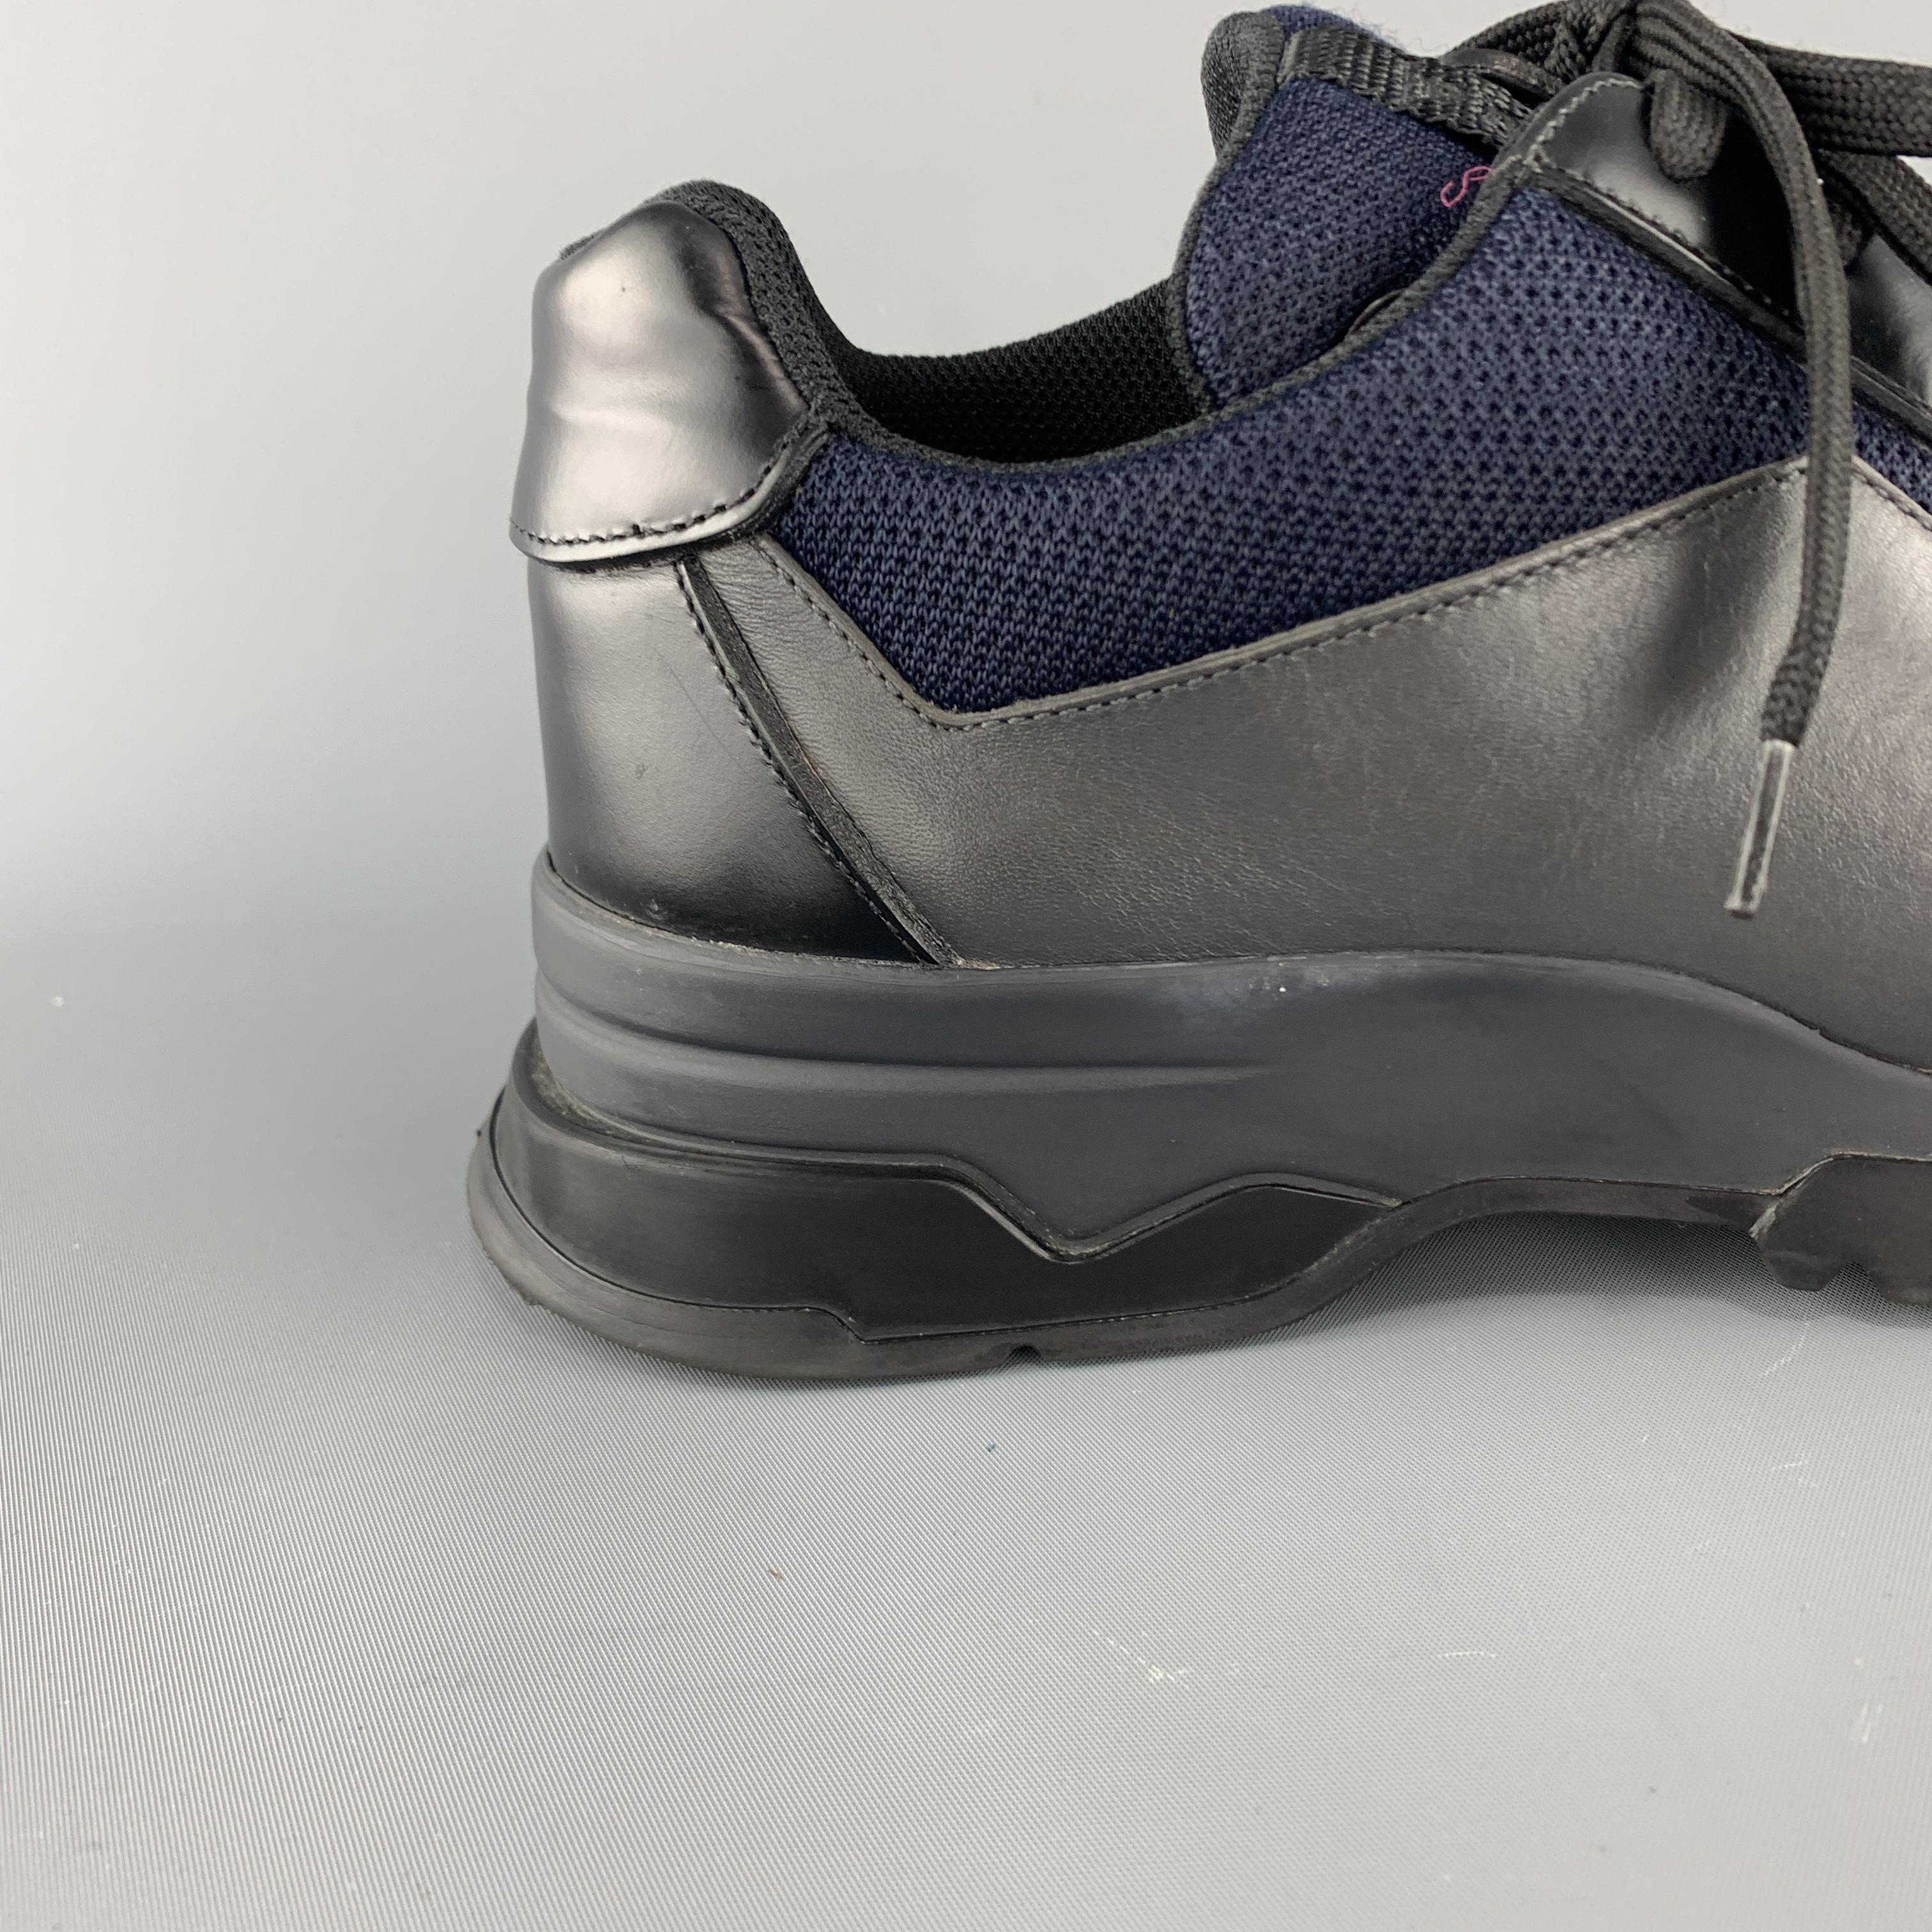 PRADA dress sneaker comes in gray and black leather with navy blue mesh panels, lace up front, and extended rubber sole with toe cap. Wear throughout. Made in Italy.

Very Good Pre-Owned Condition.
Marked: UK 8

Outsole: 12.5 x 4.5 in.